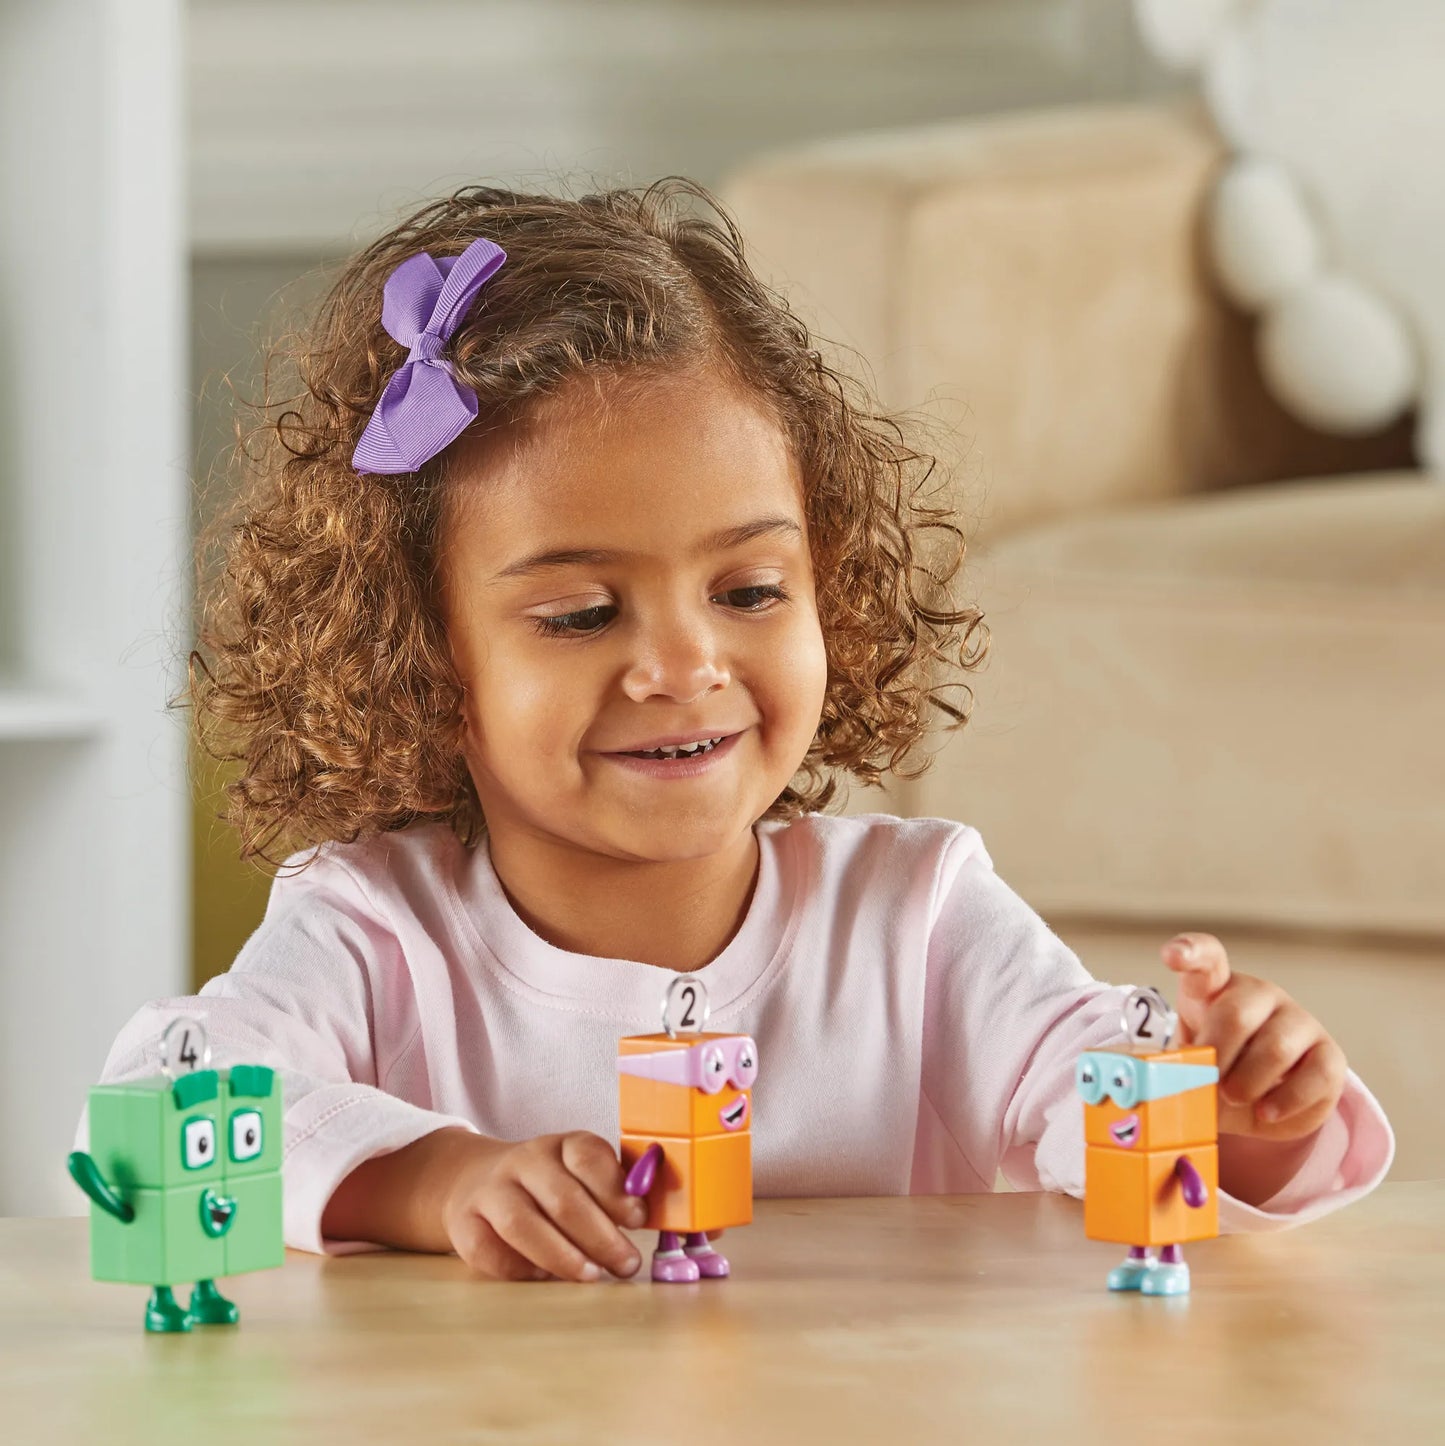 Numberblocks® Four and The Terrible Twos Figure Pack